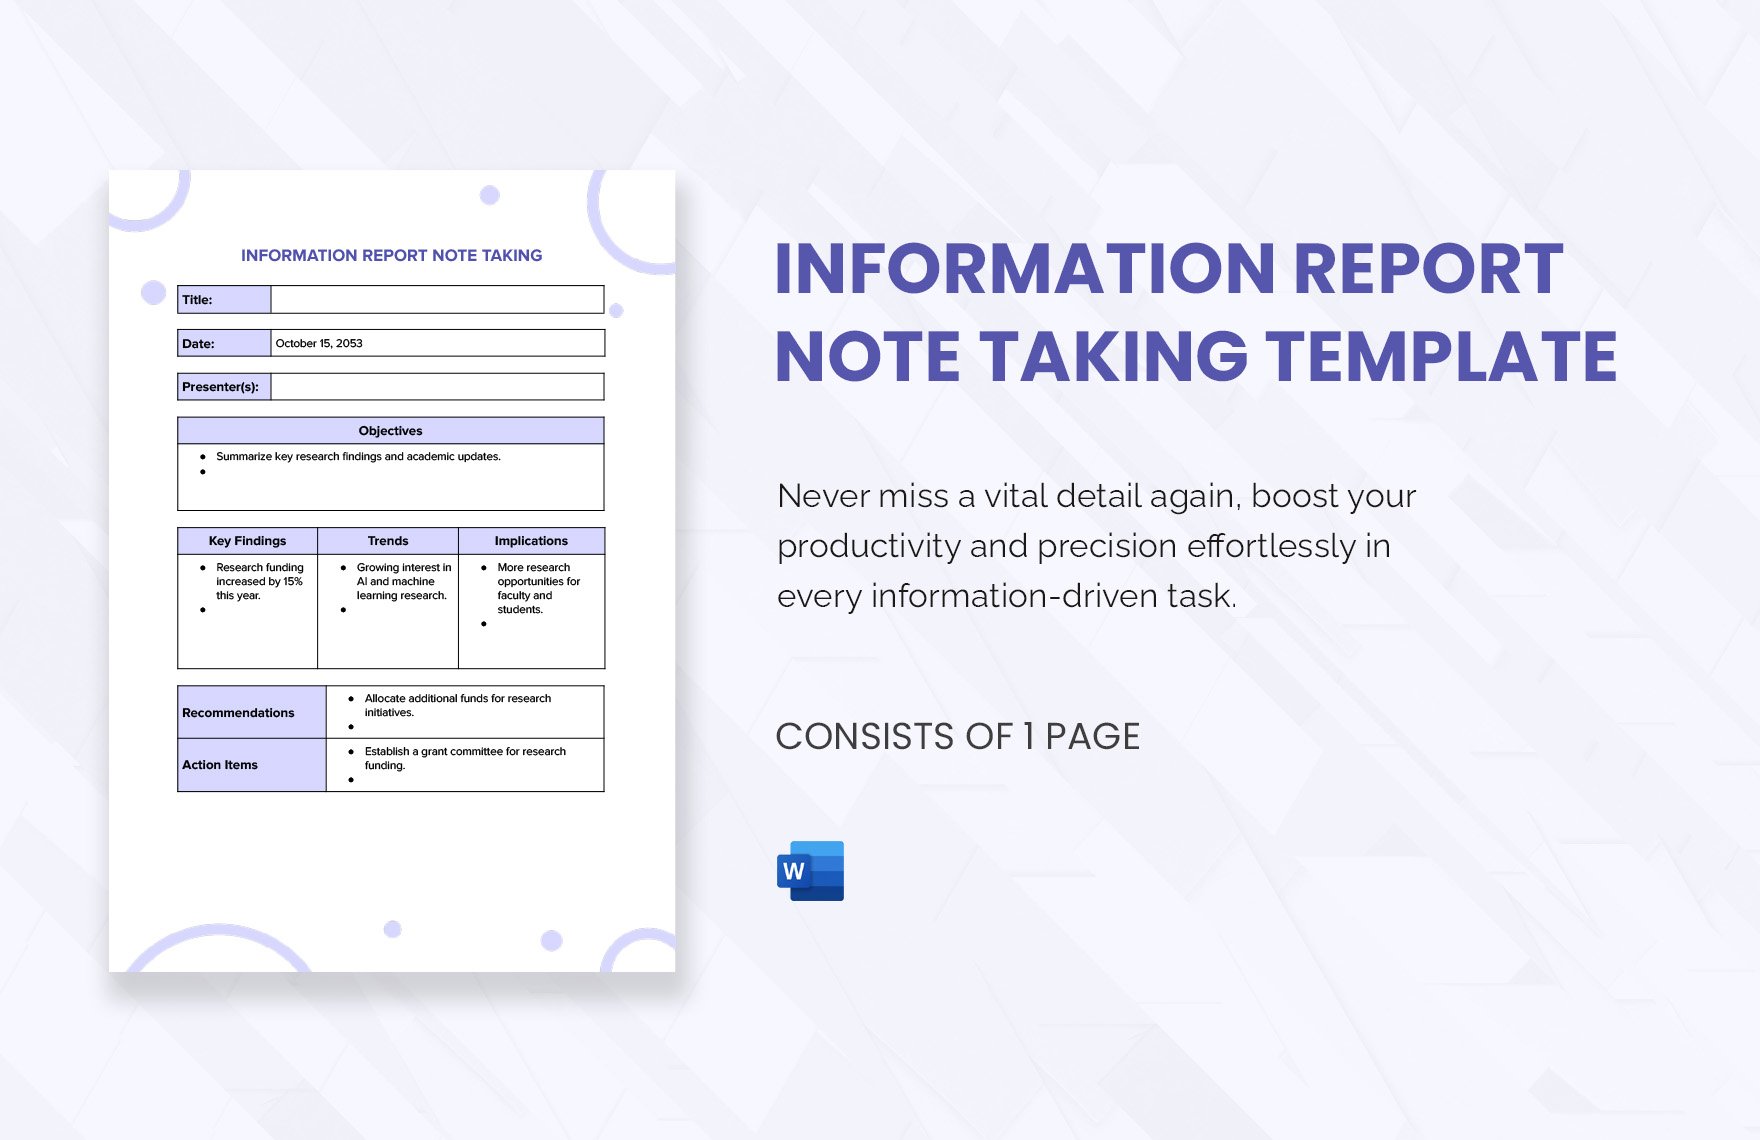 Free Information Report Note Taking Template in Word